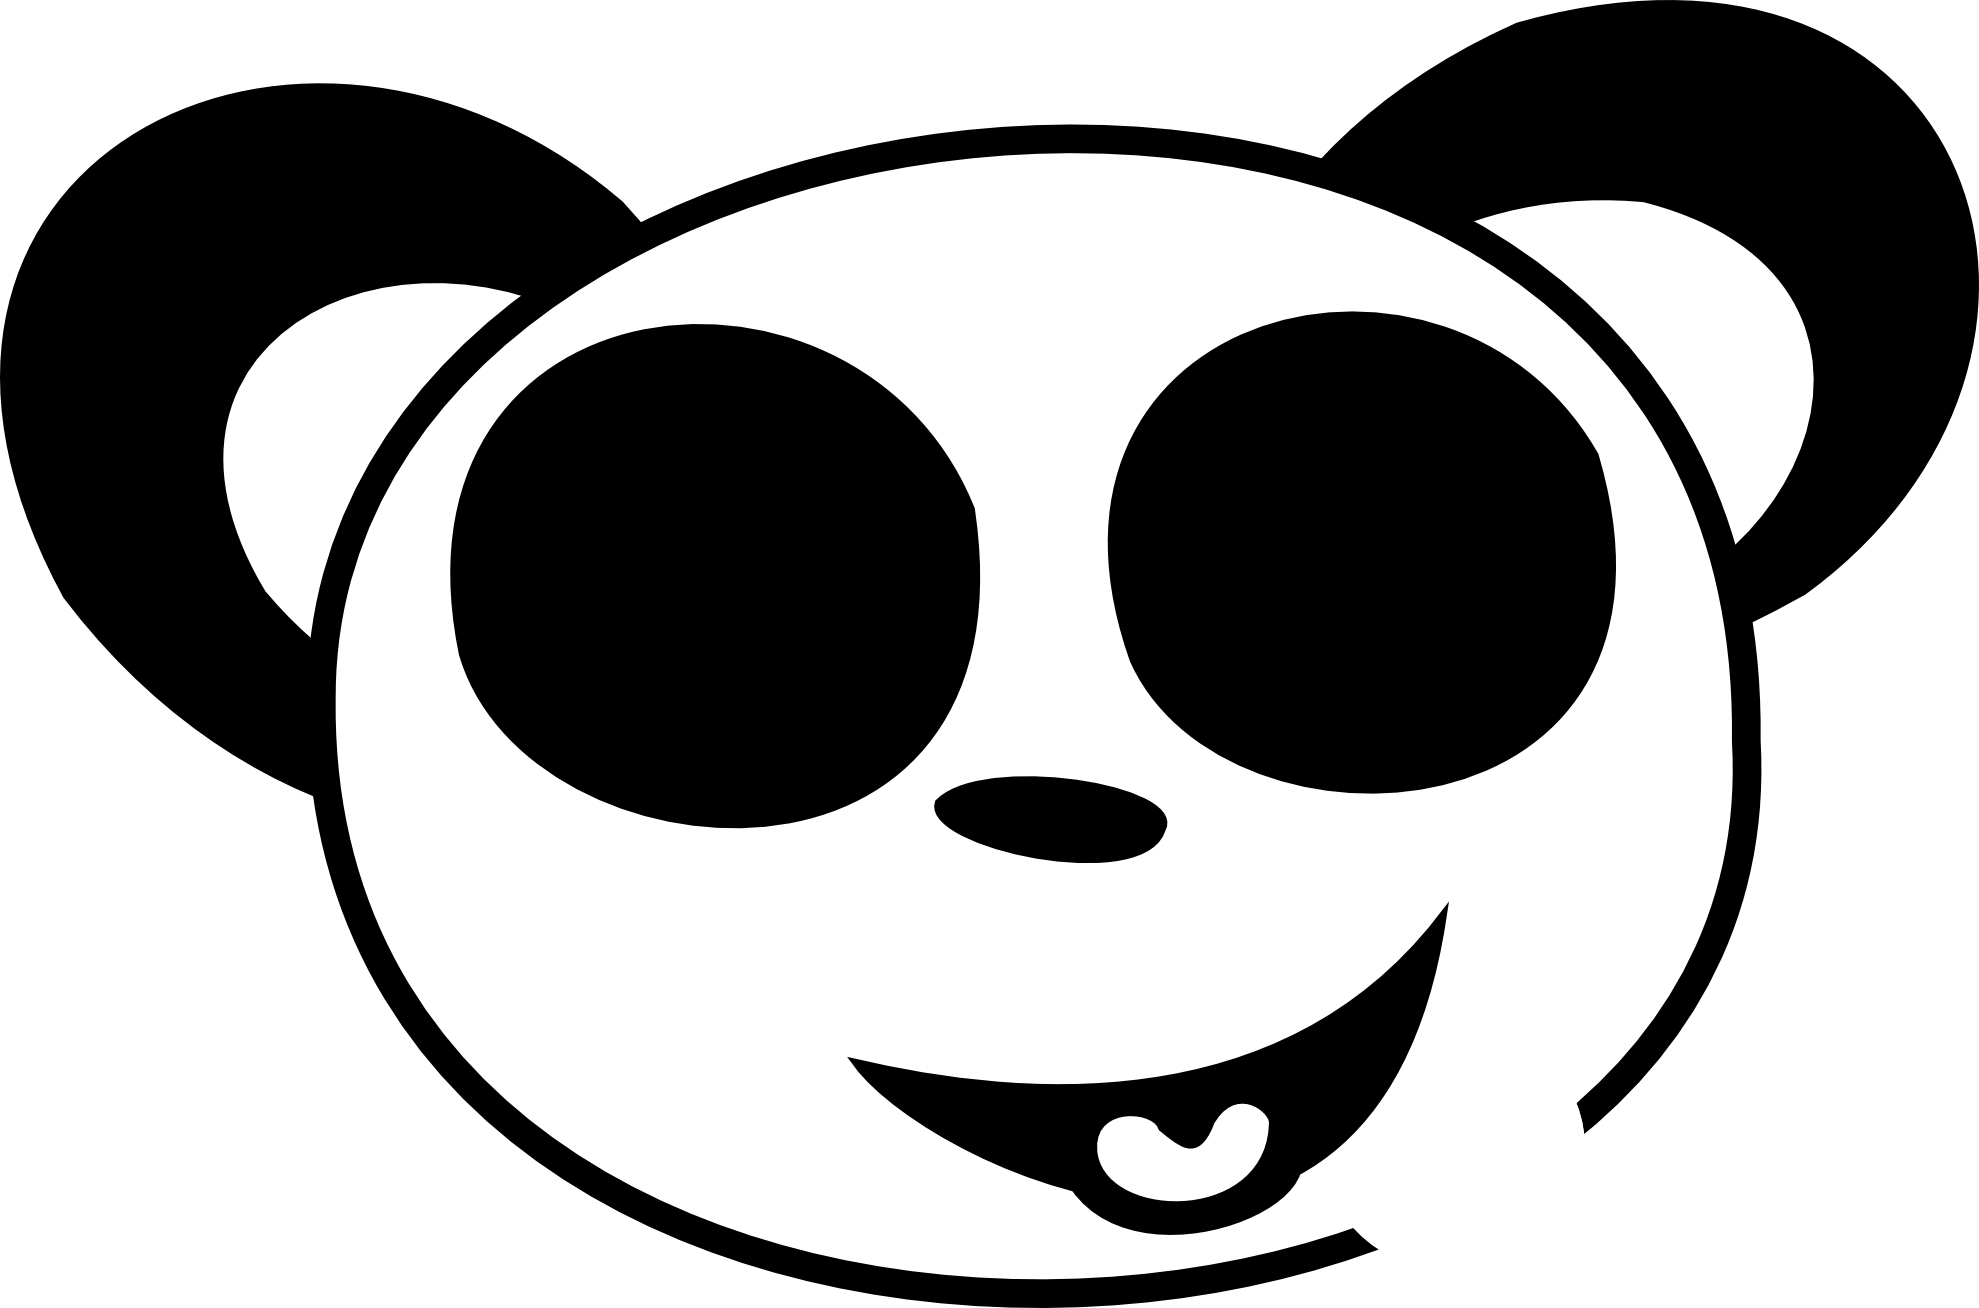 Smiley Face Clipart Black And White | Clipart Panda - Free Clipart ...